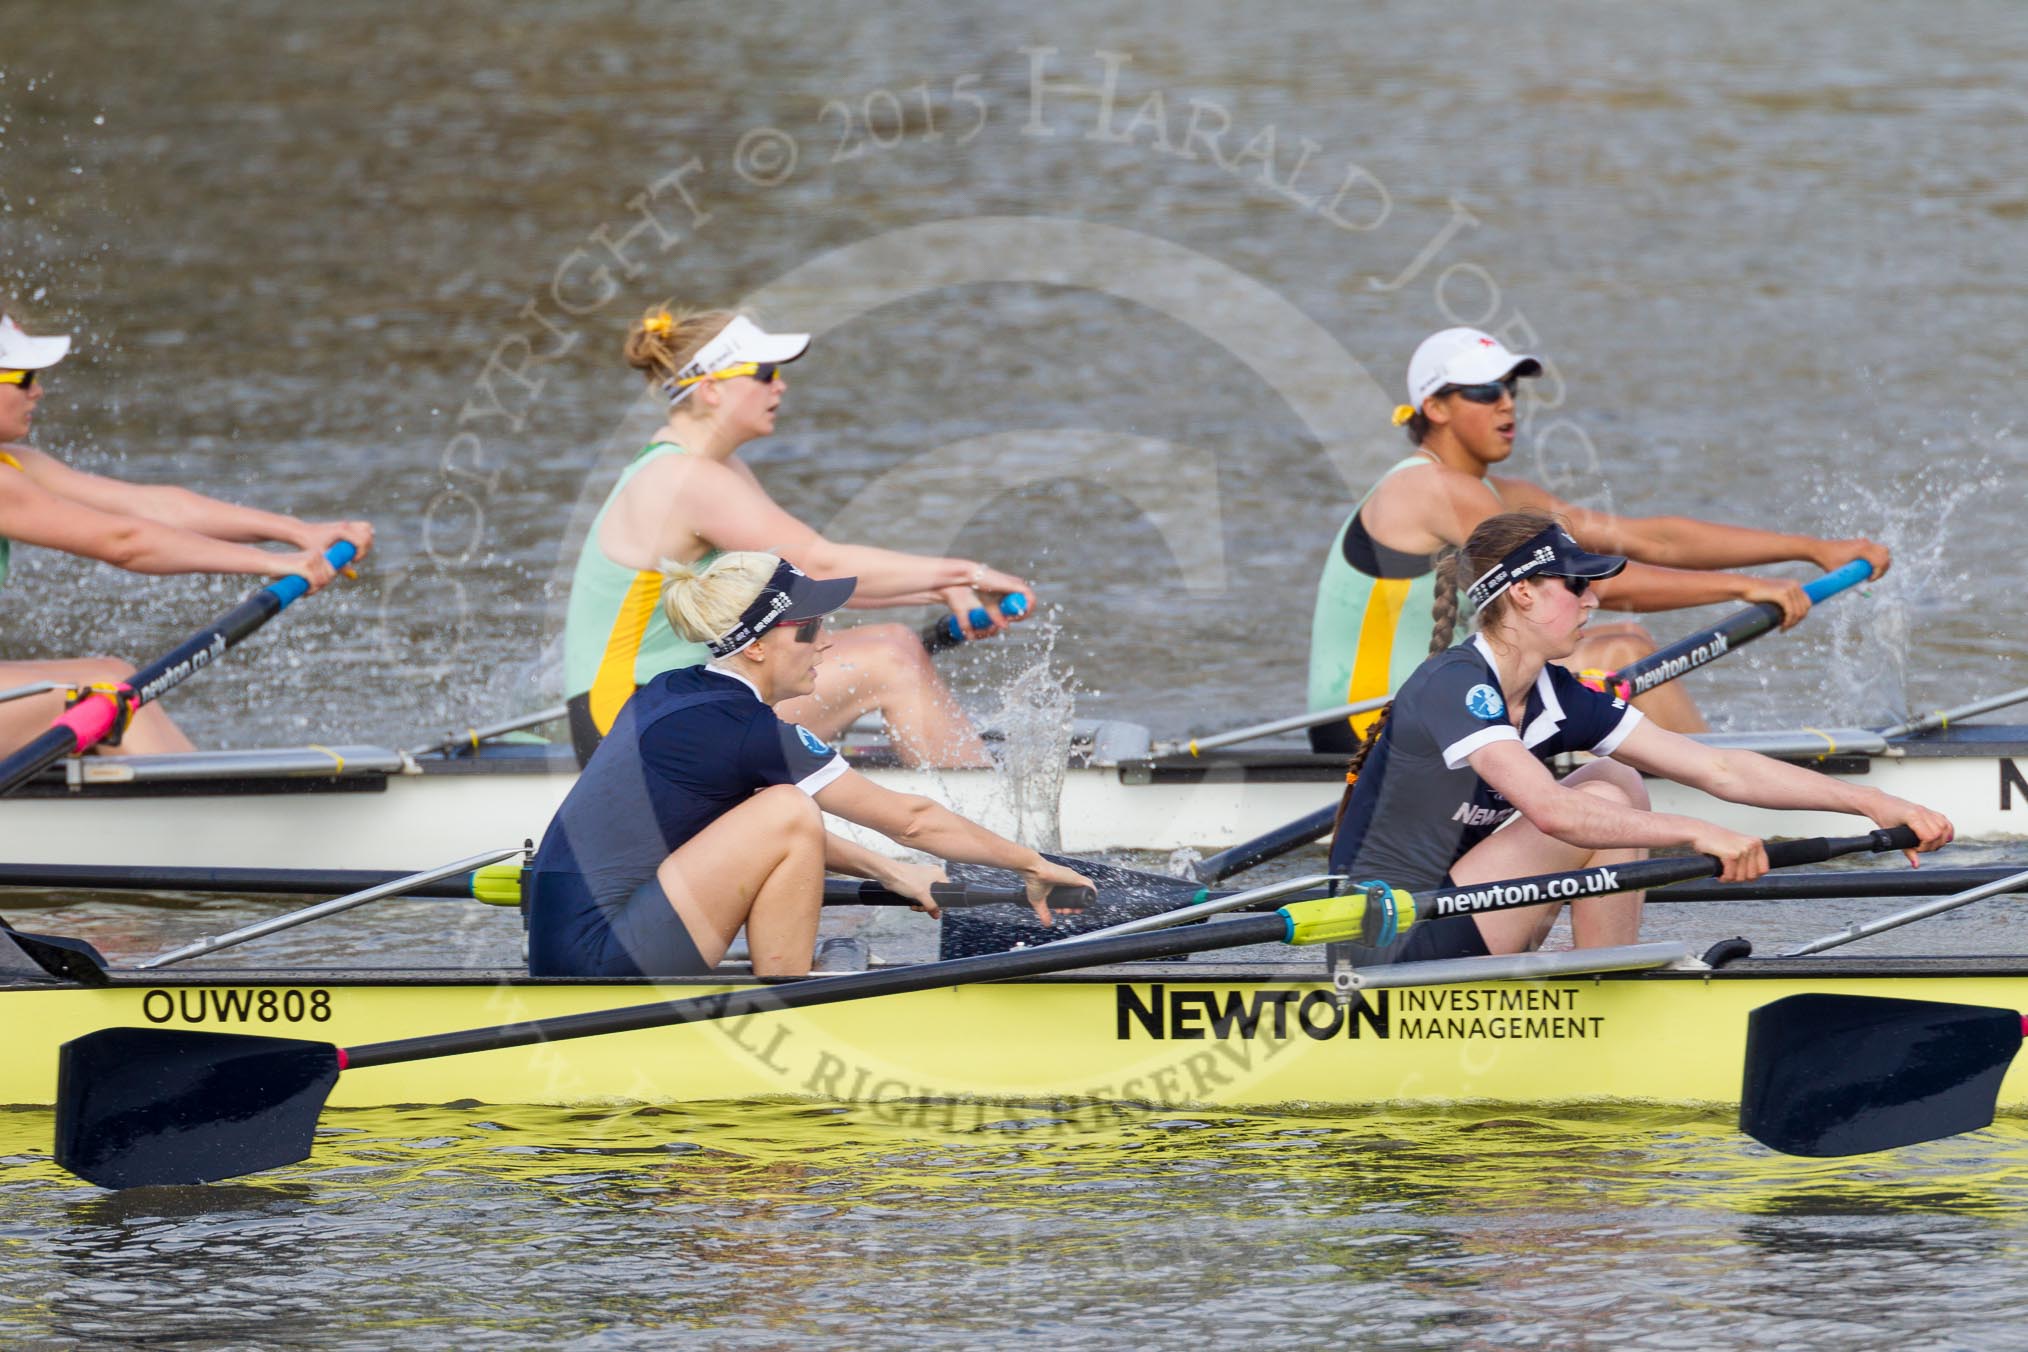 The Boat Race season 2015 - Newton Women's Boat Race.
River Thames between Putney and Mortlake,
London,

United Kingdom,
on 10 April 2015 at 16:02, image #113